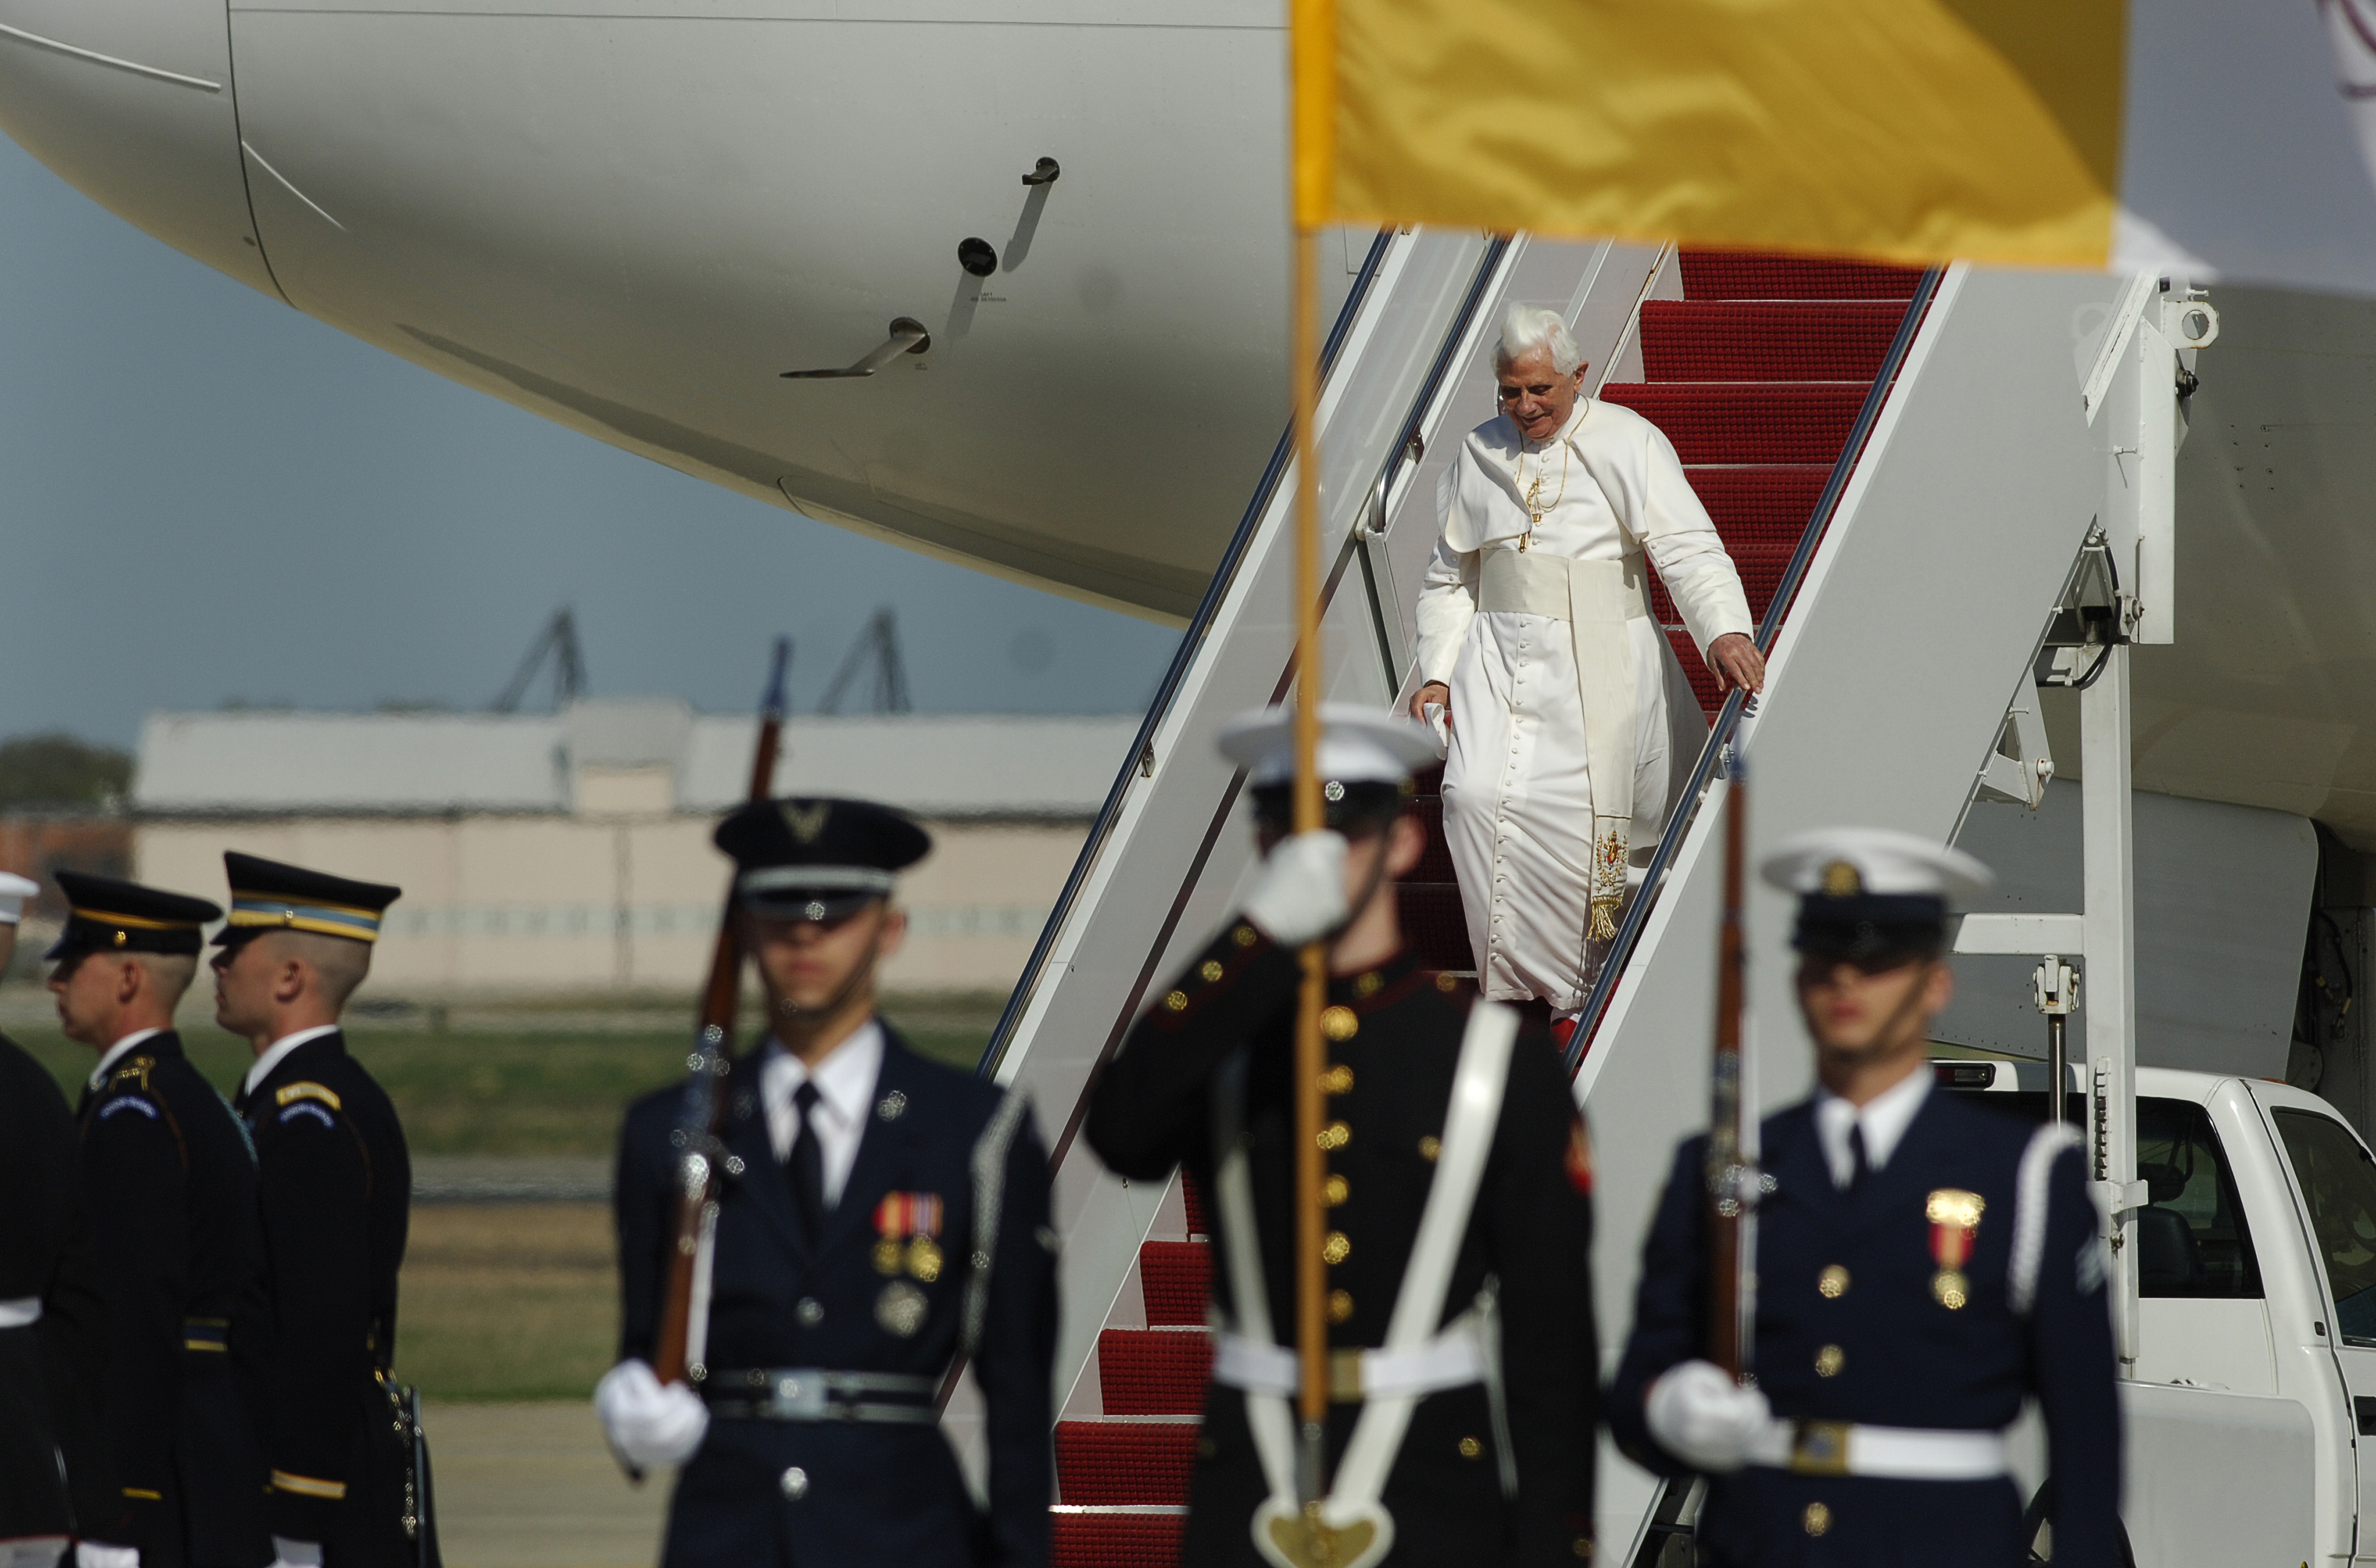 Pope Benedict XVI hosted by the 316th Wing